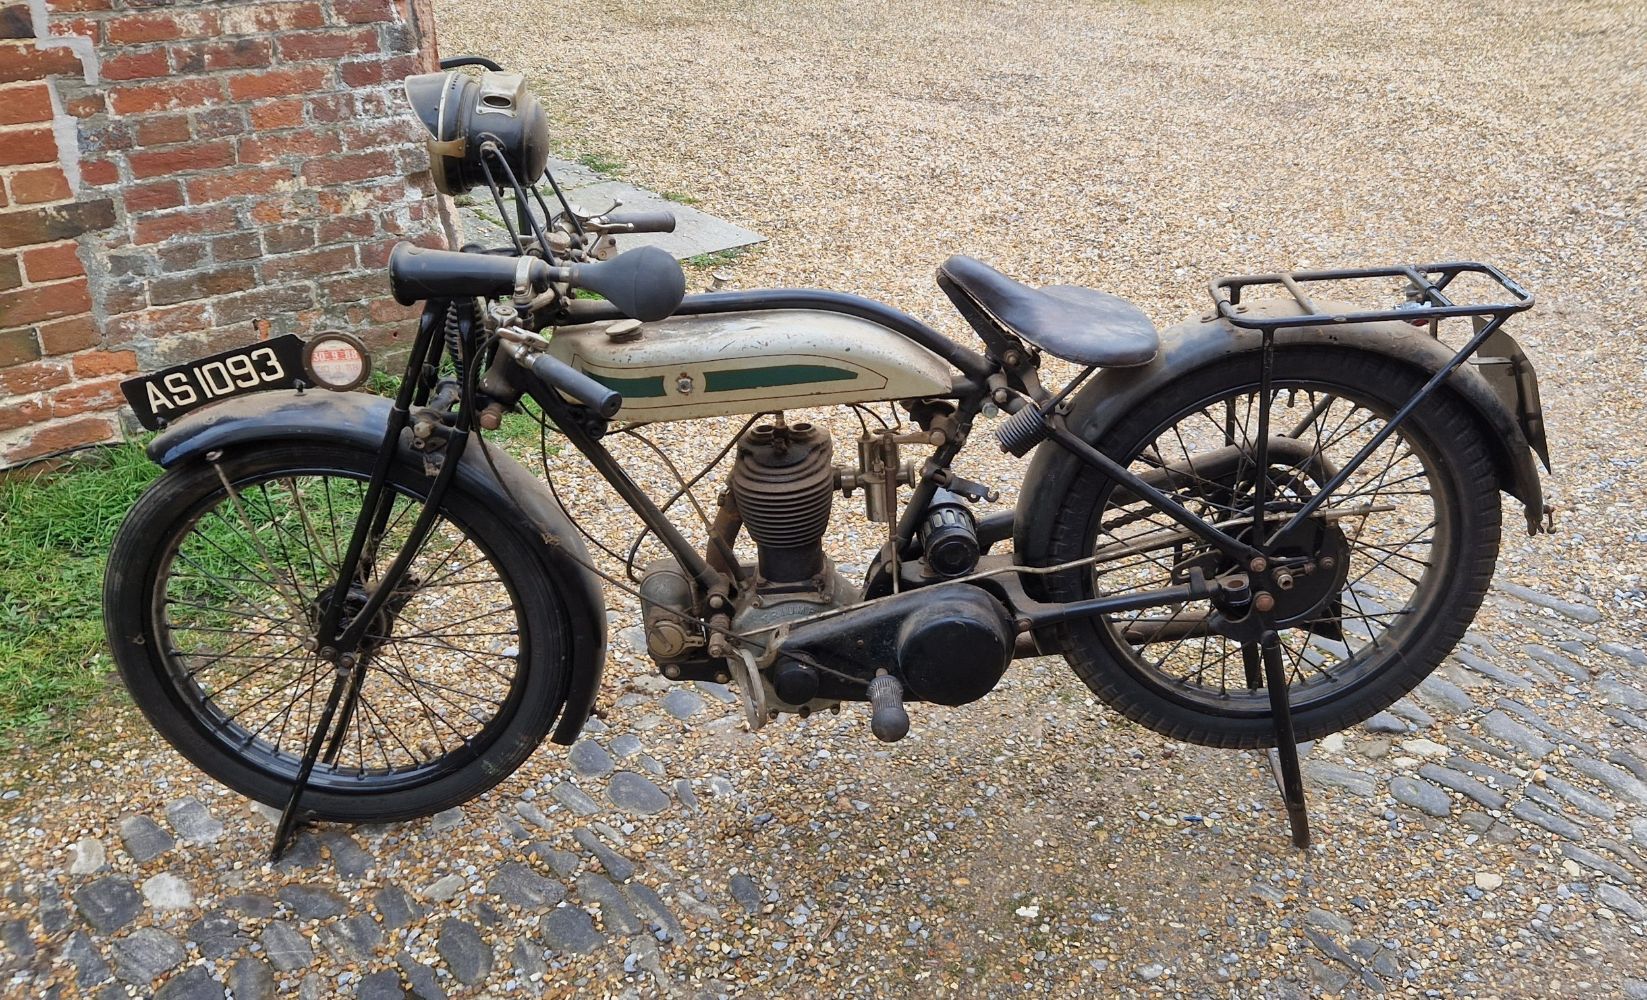 Antique, Fine Art and Interior Design Auction to Include A 1927 Triumph Motorcycle